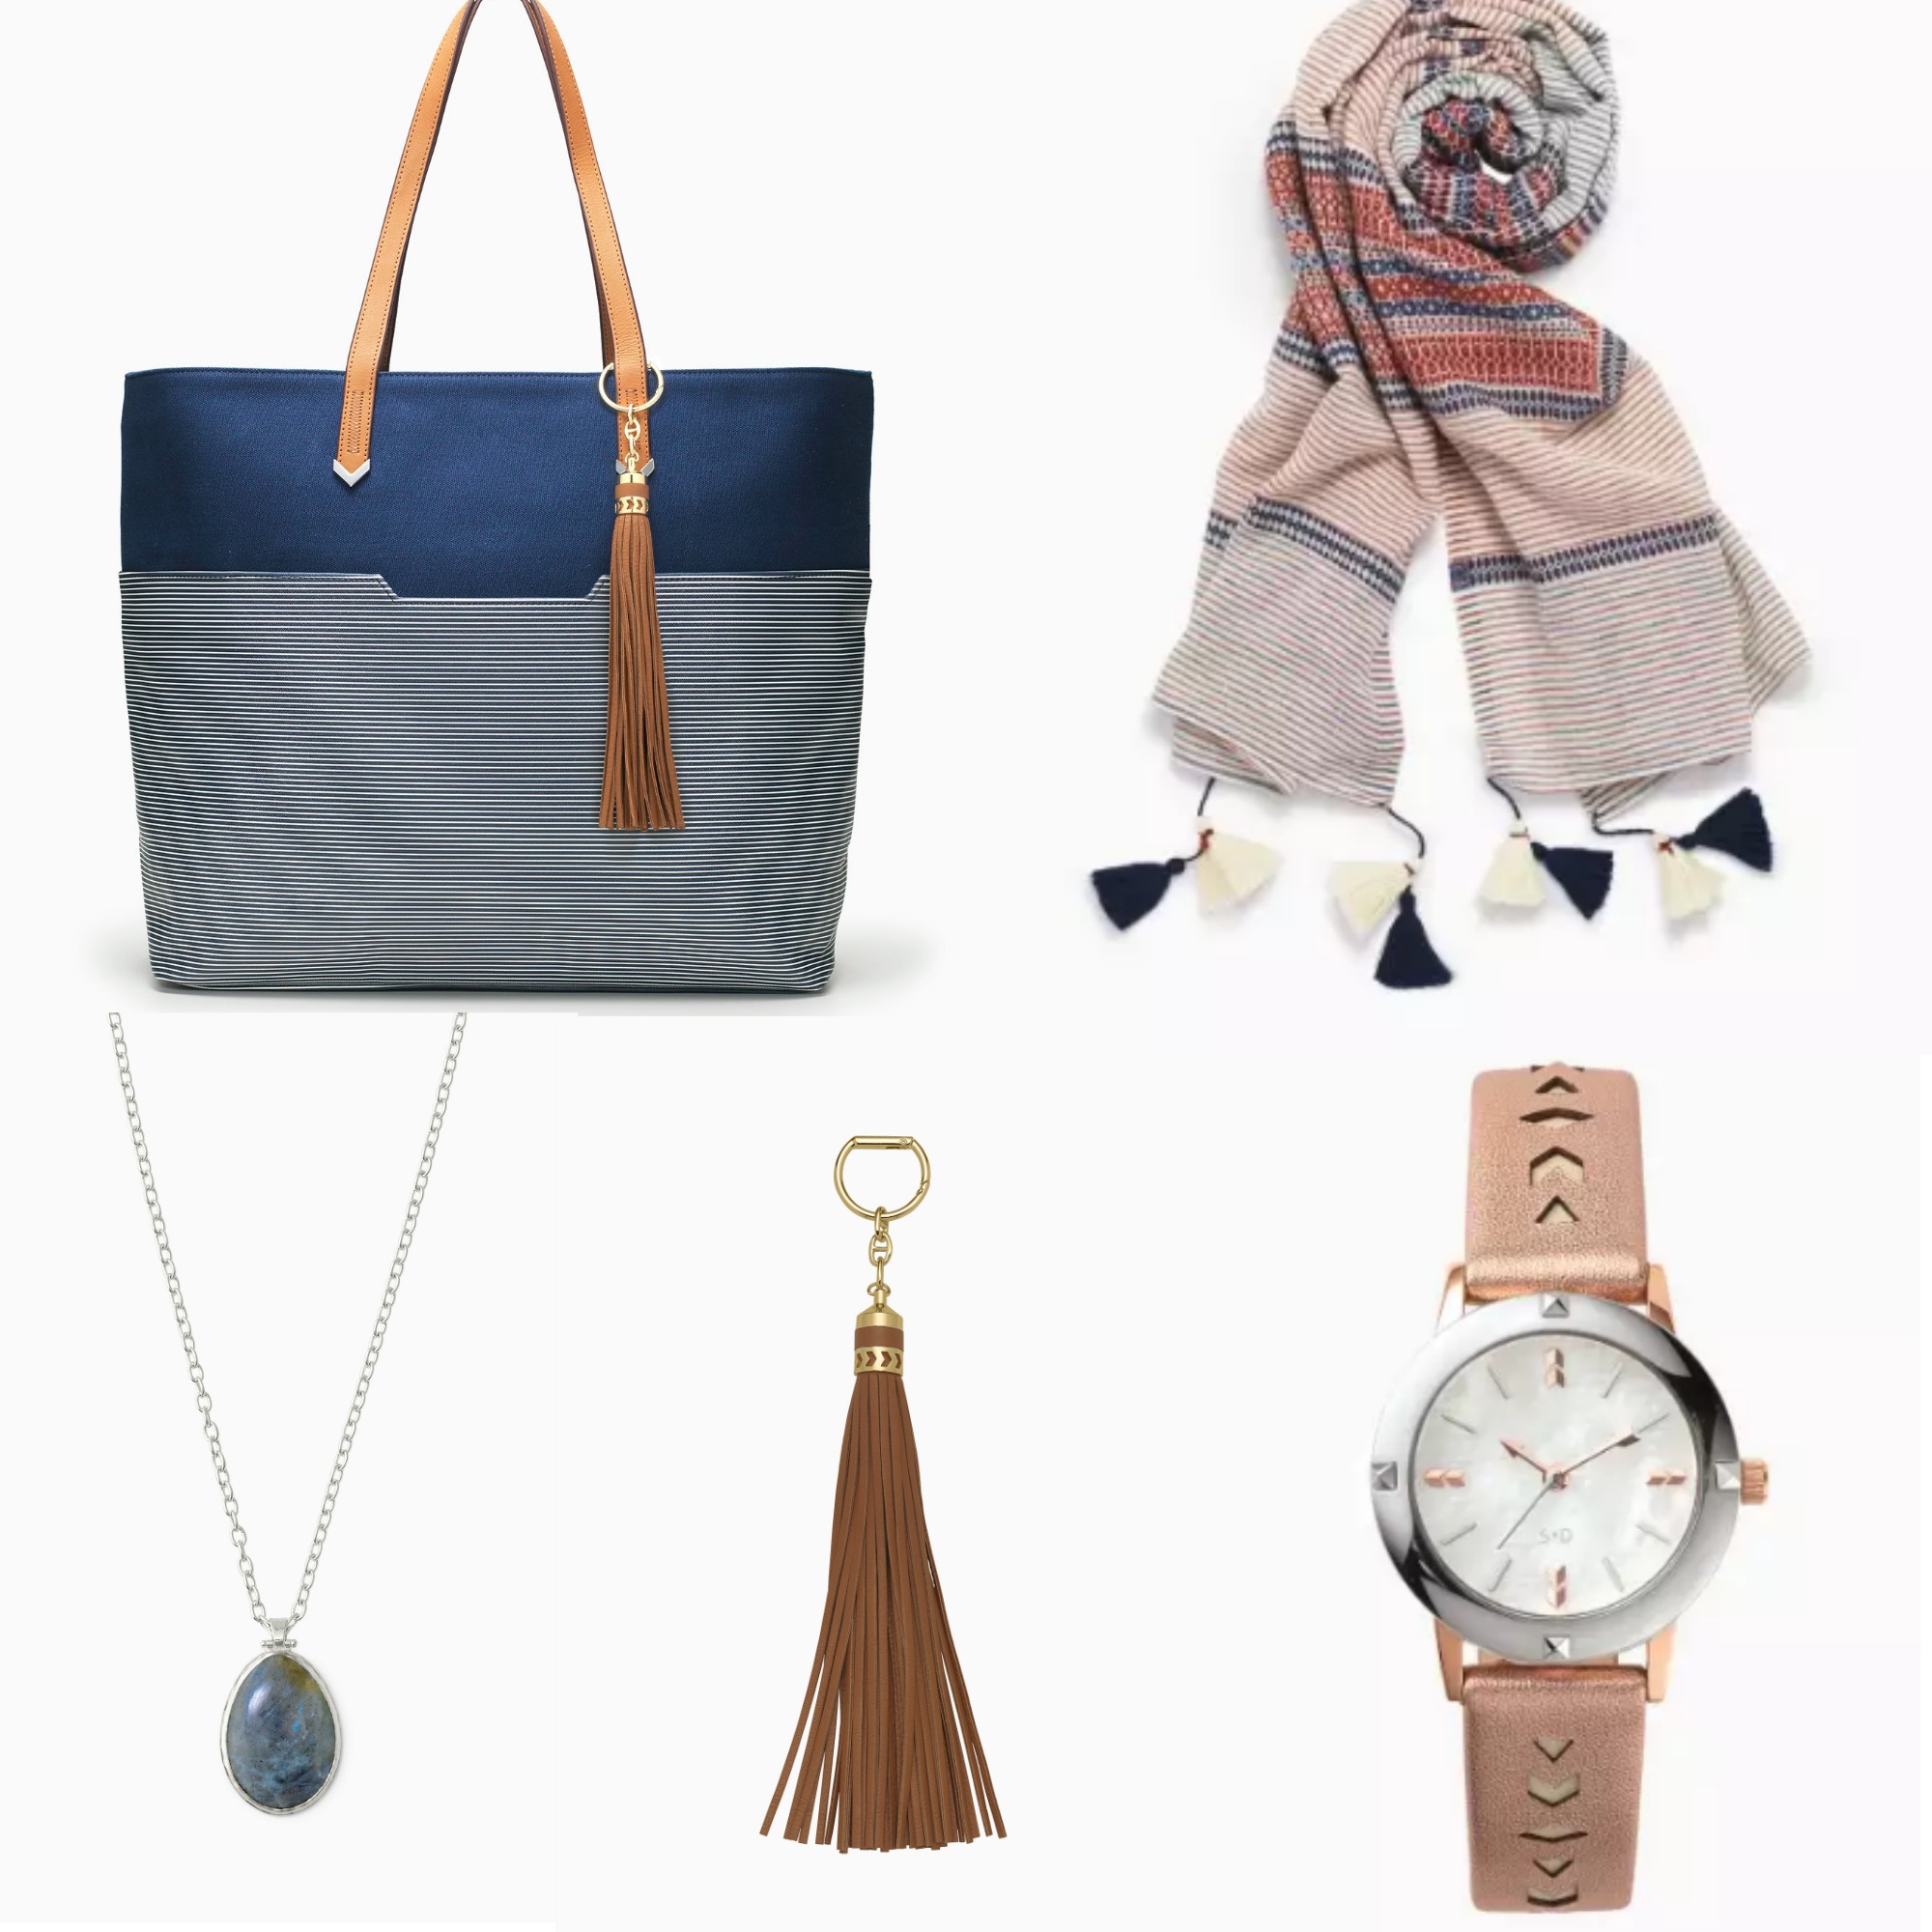 5 Gift Ideas From The Stella & Dot Holiday Sales